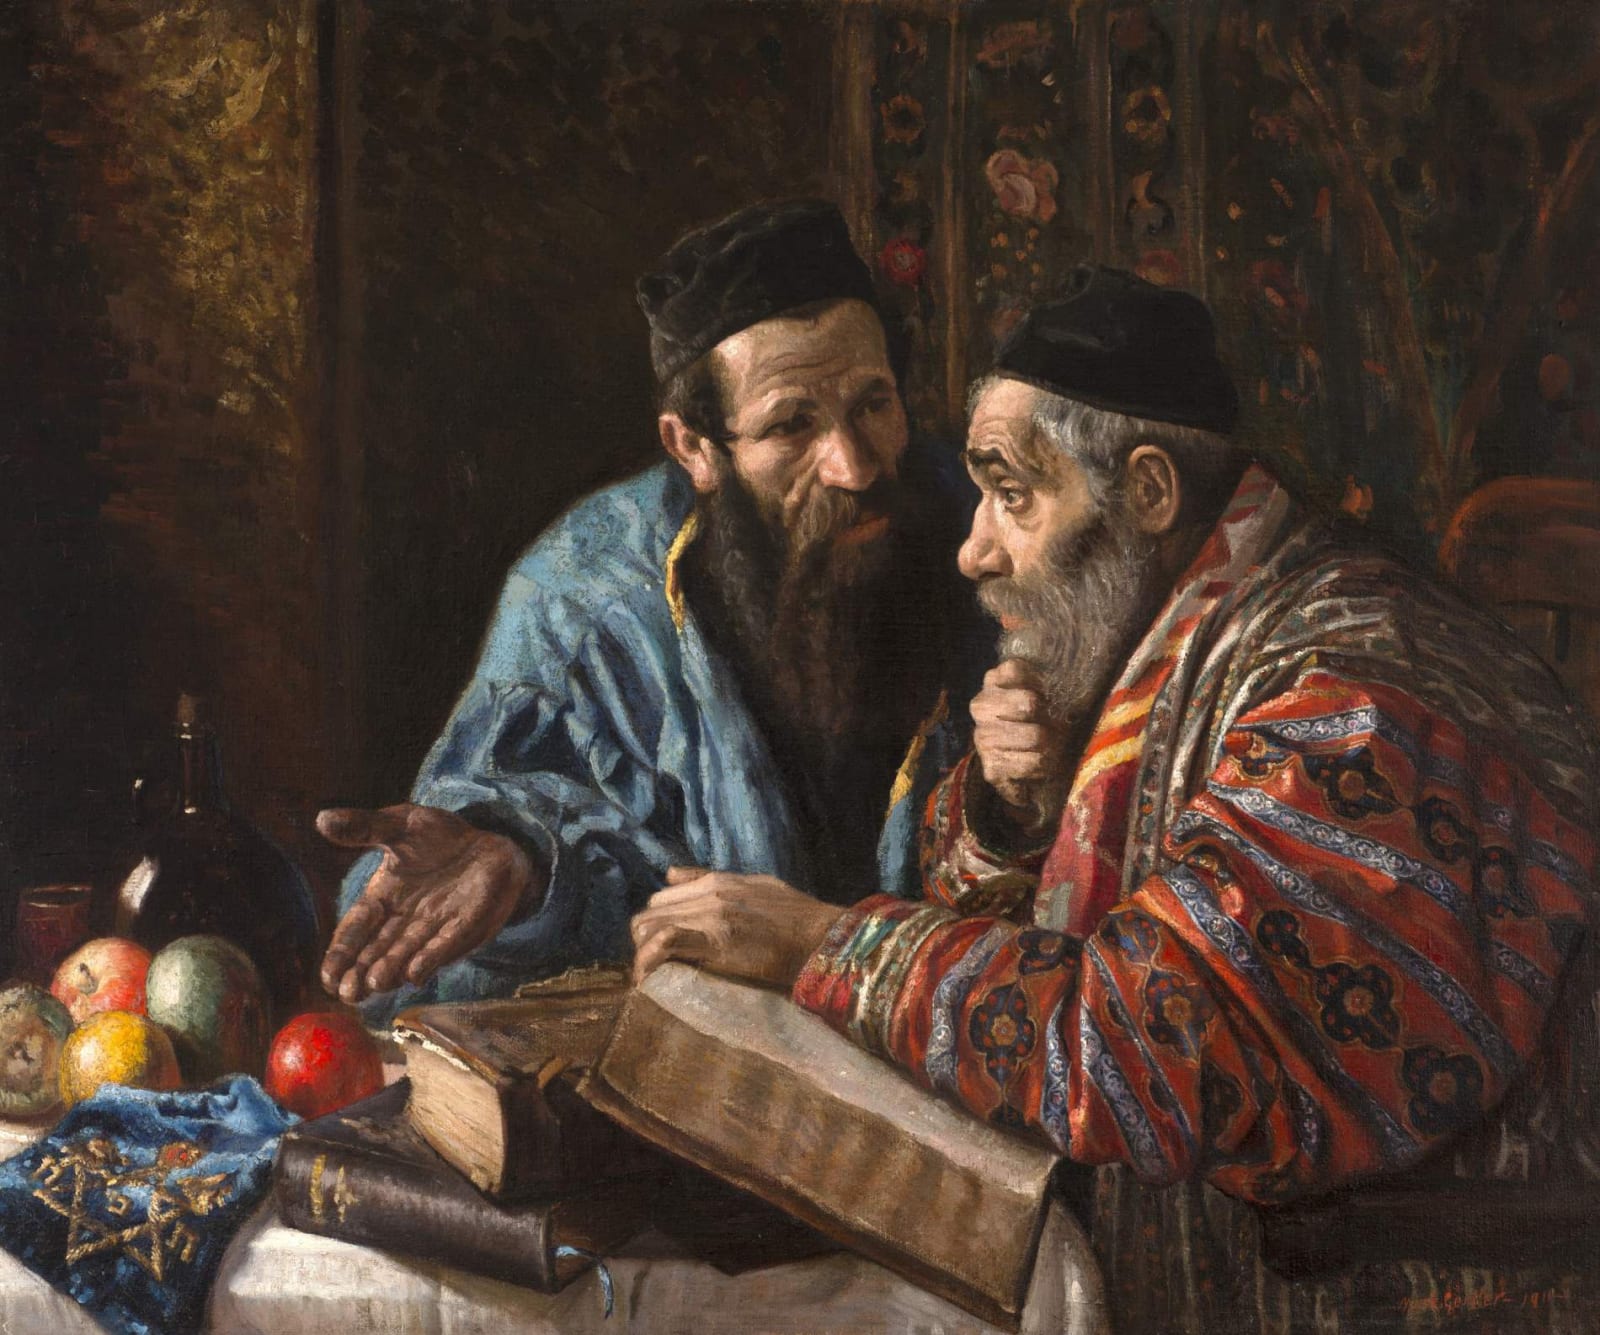 Mark Gertler (1891-1939) Talmudic Discussion 1911 Oil on canvas 76.5 x 92.5 cm On loan to Ben Uri Collection To see and discover more about this artist click here